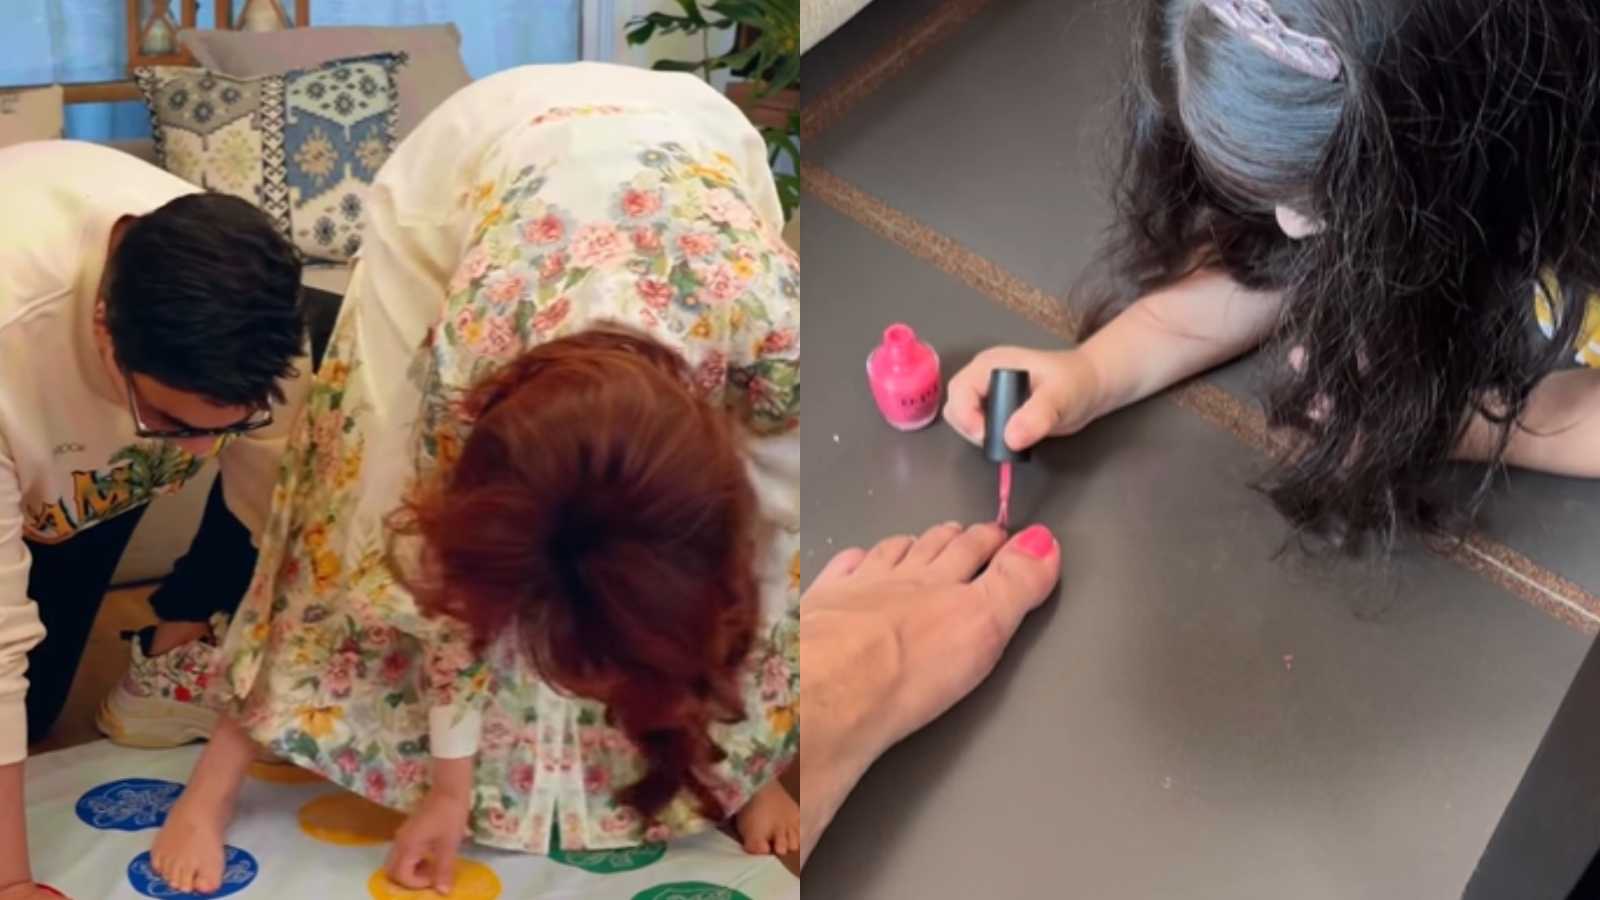 Twinkle Khanna and Karan Johar can't stop laughing playing Twister; Inaaya makes the most of Kunal Kemmu's mid-morning nap - Watch